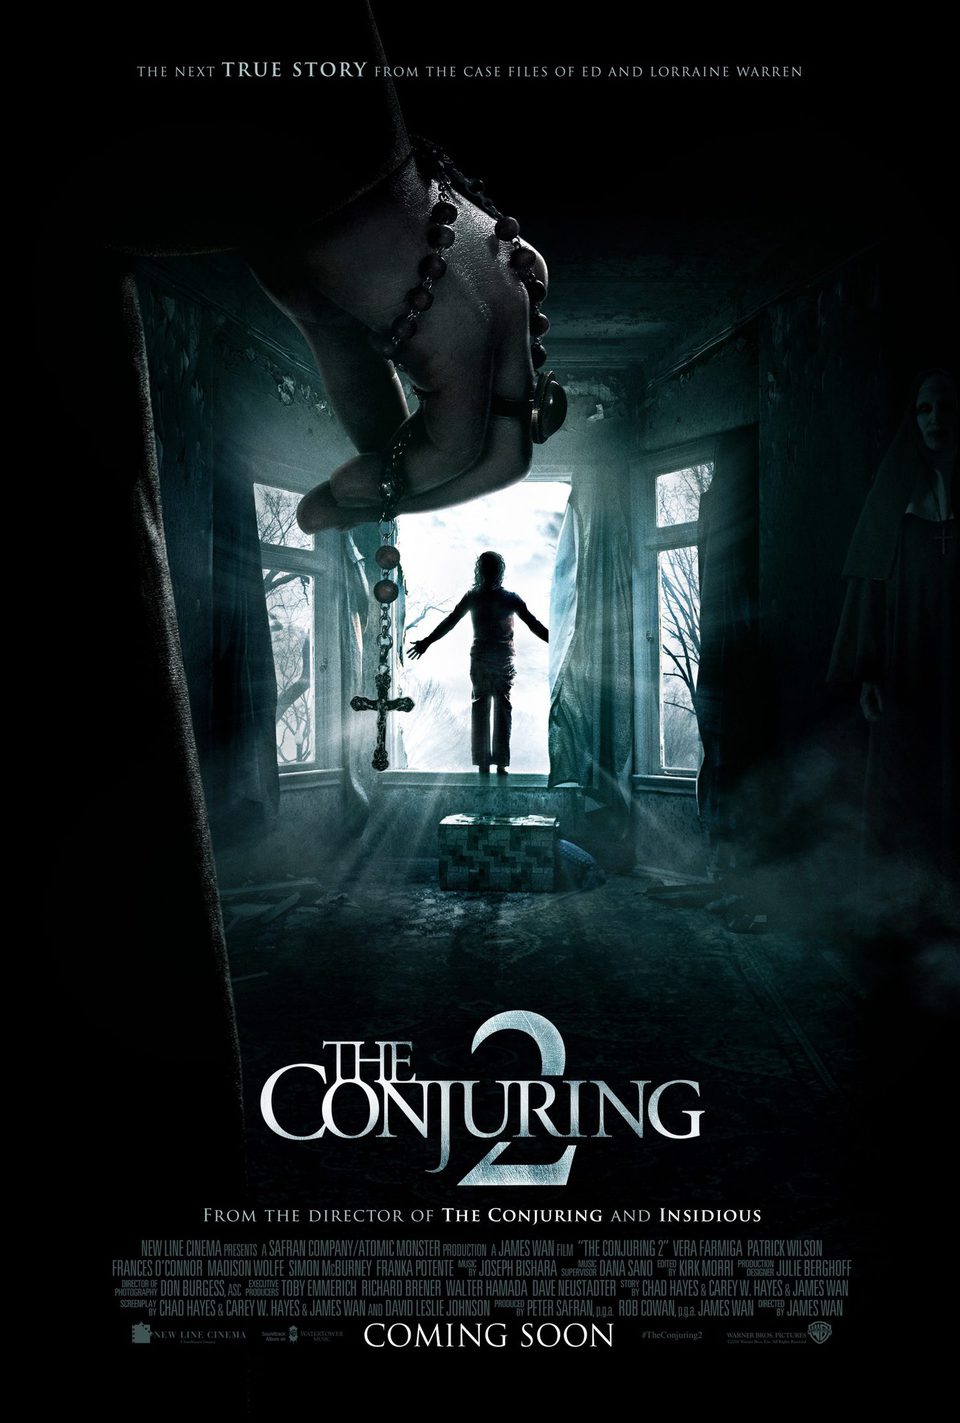 EE.UU #2 poster for The Conjuring 2: The Enfield Poltergeist